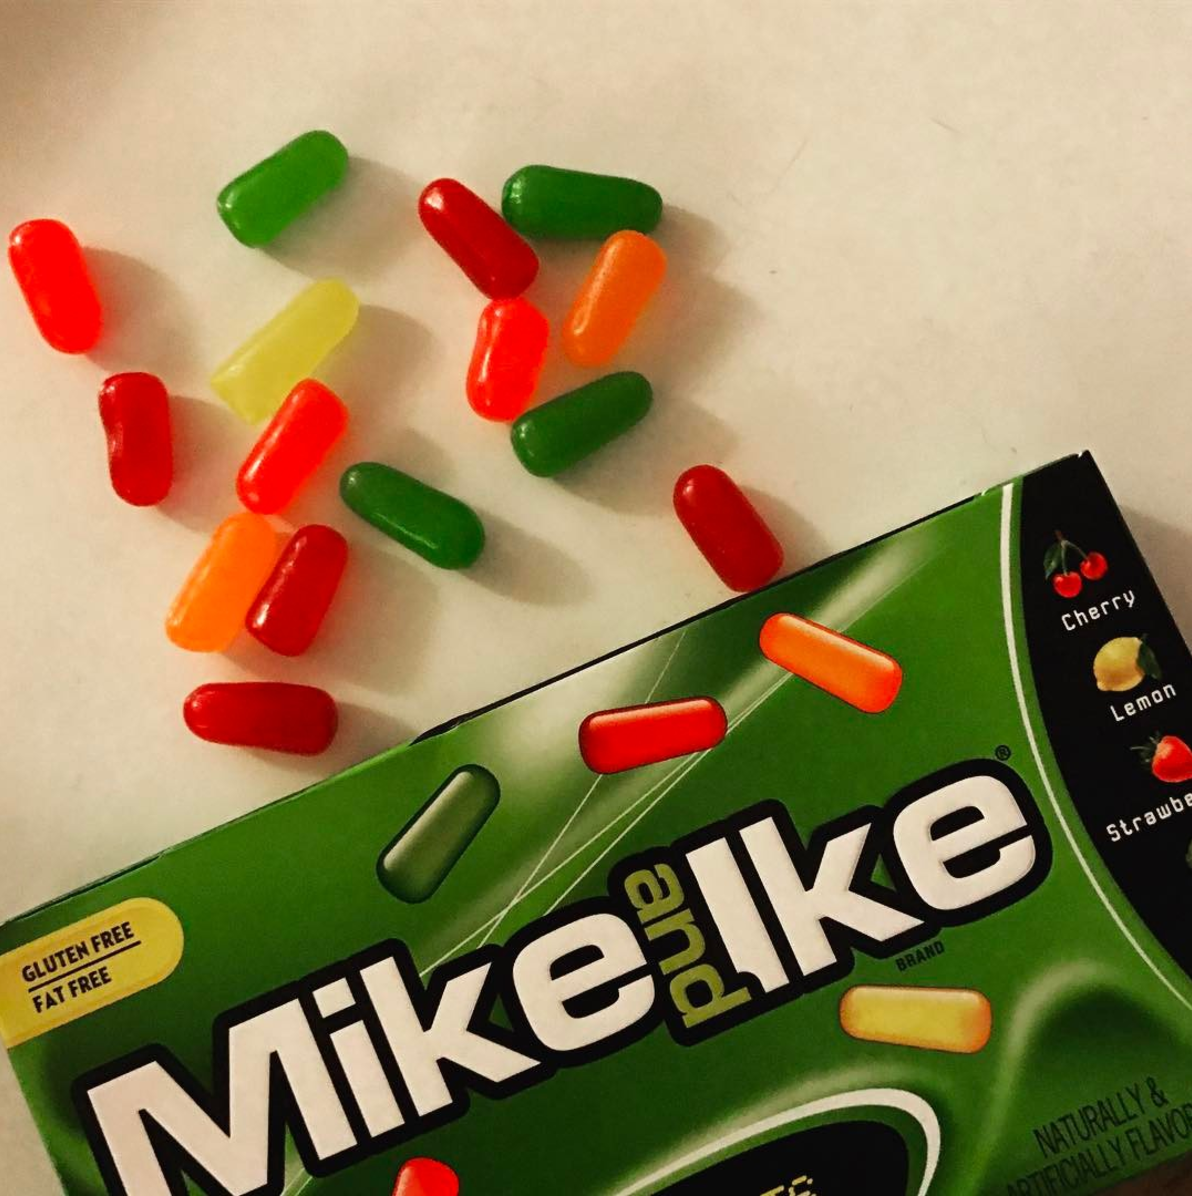 Entity reports on the California woman suing Mike and Ike for using too much slack-fill.